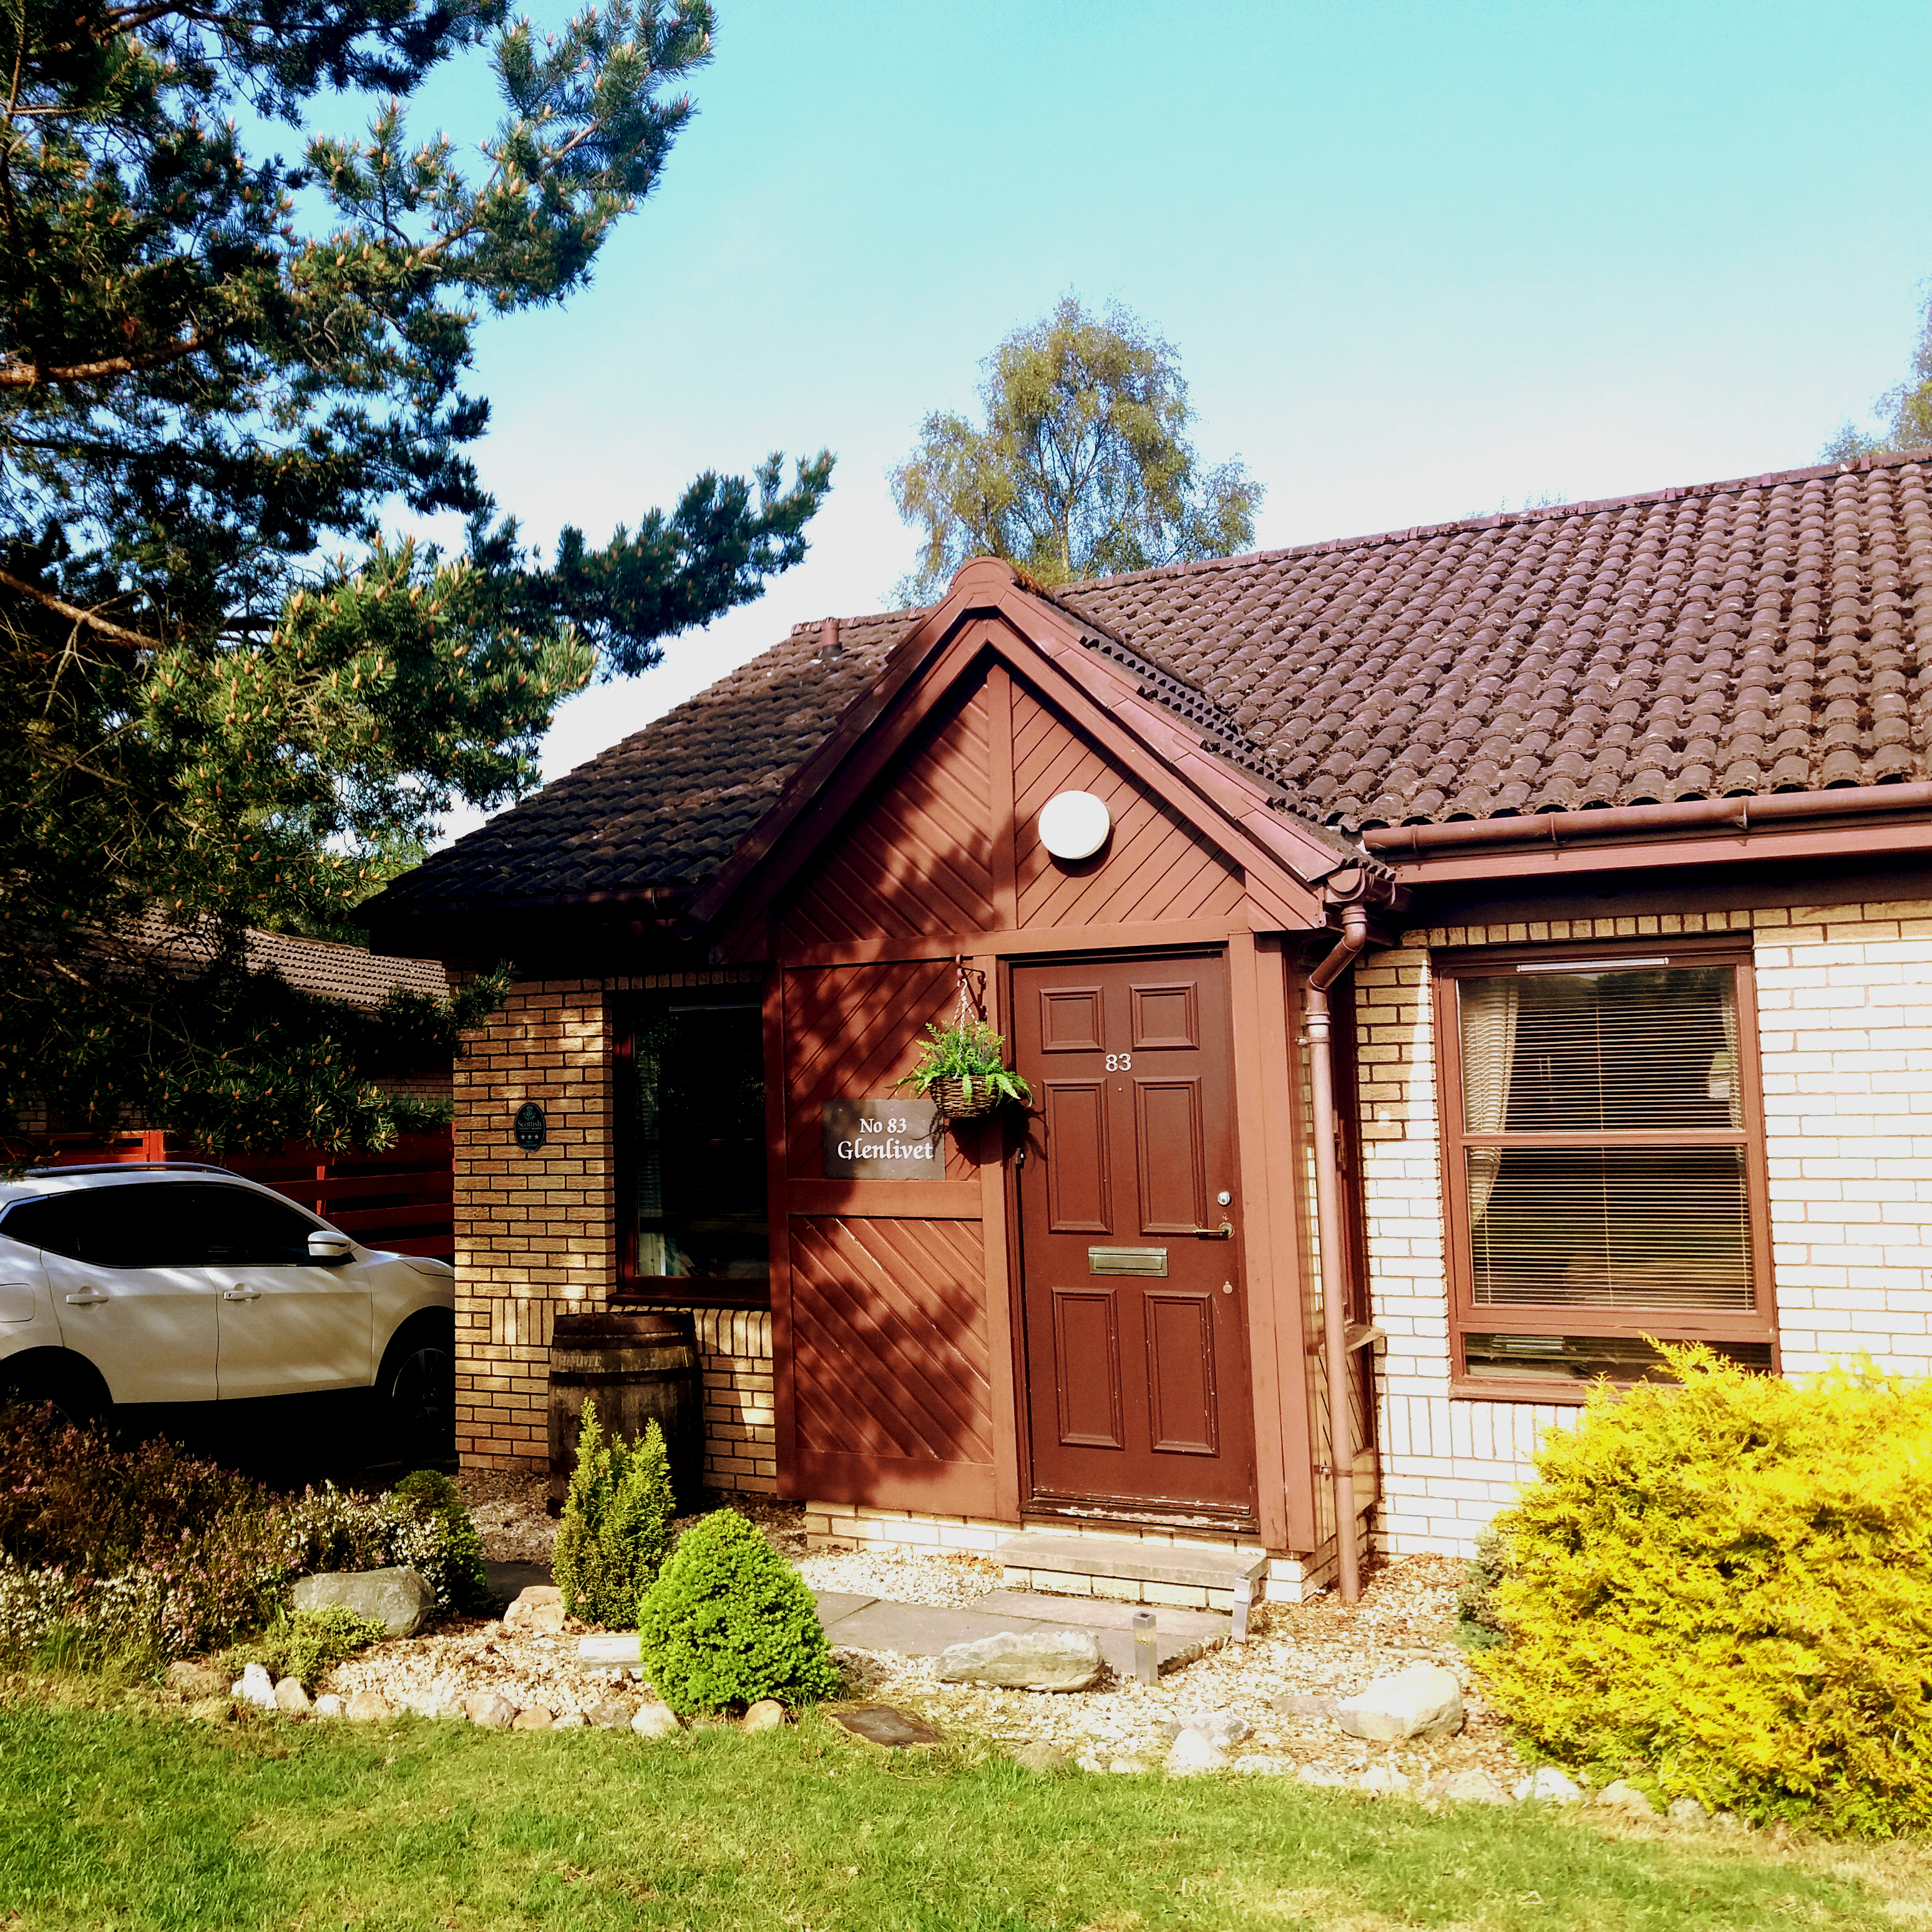 Self catering, 3 bedroom, 6 person, 10 mins to centre of Aviemore.